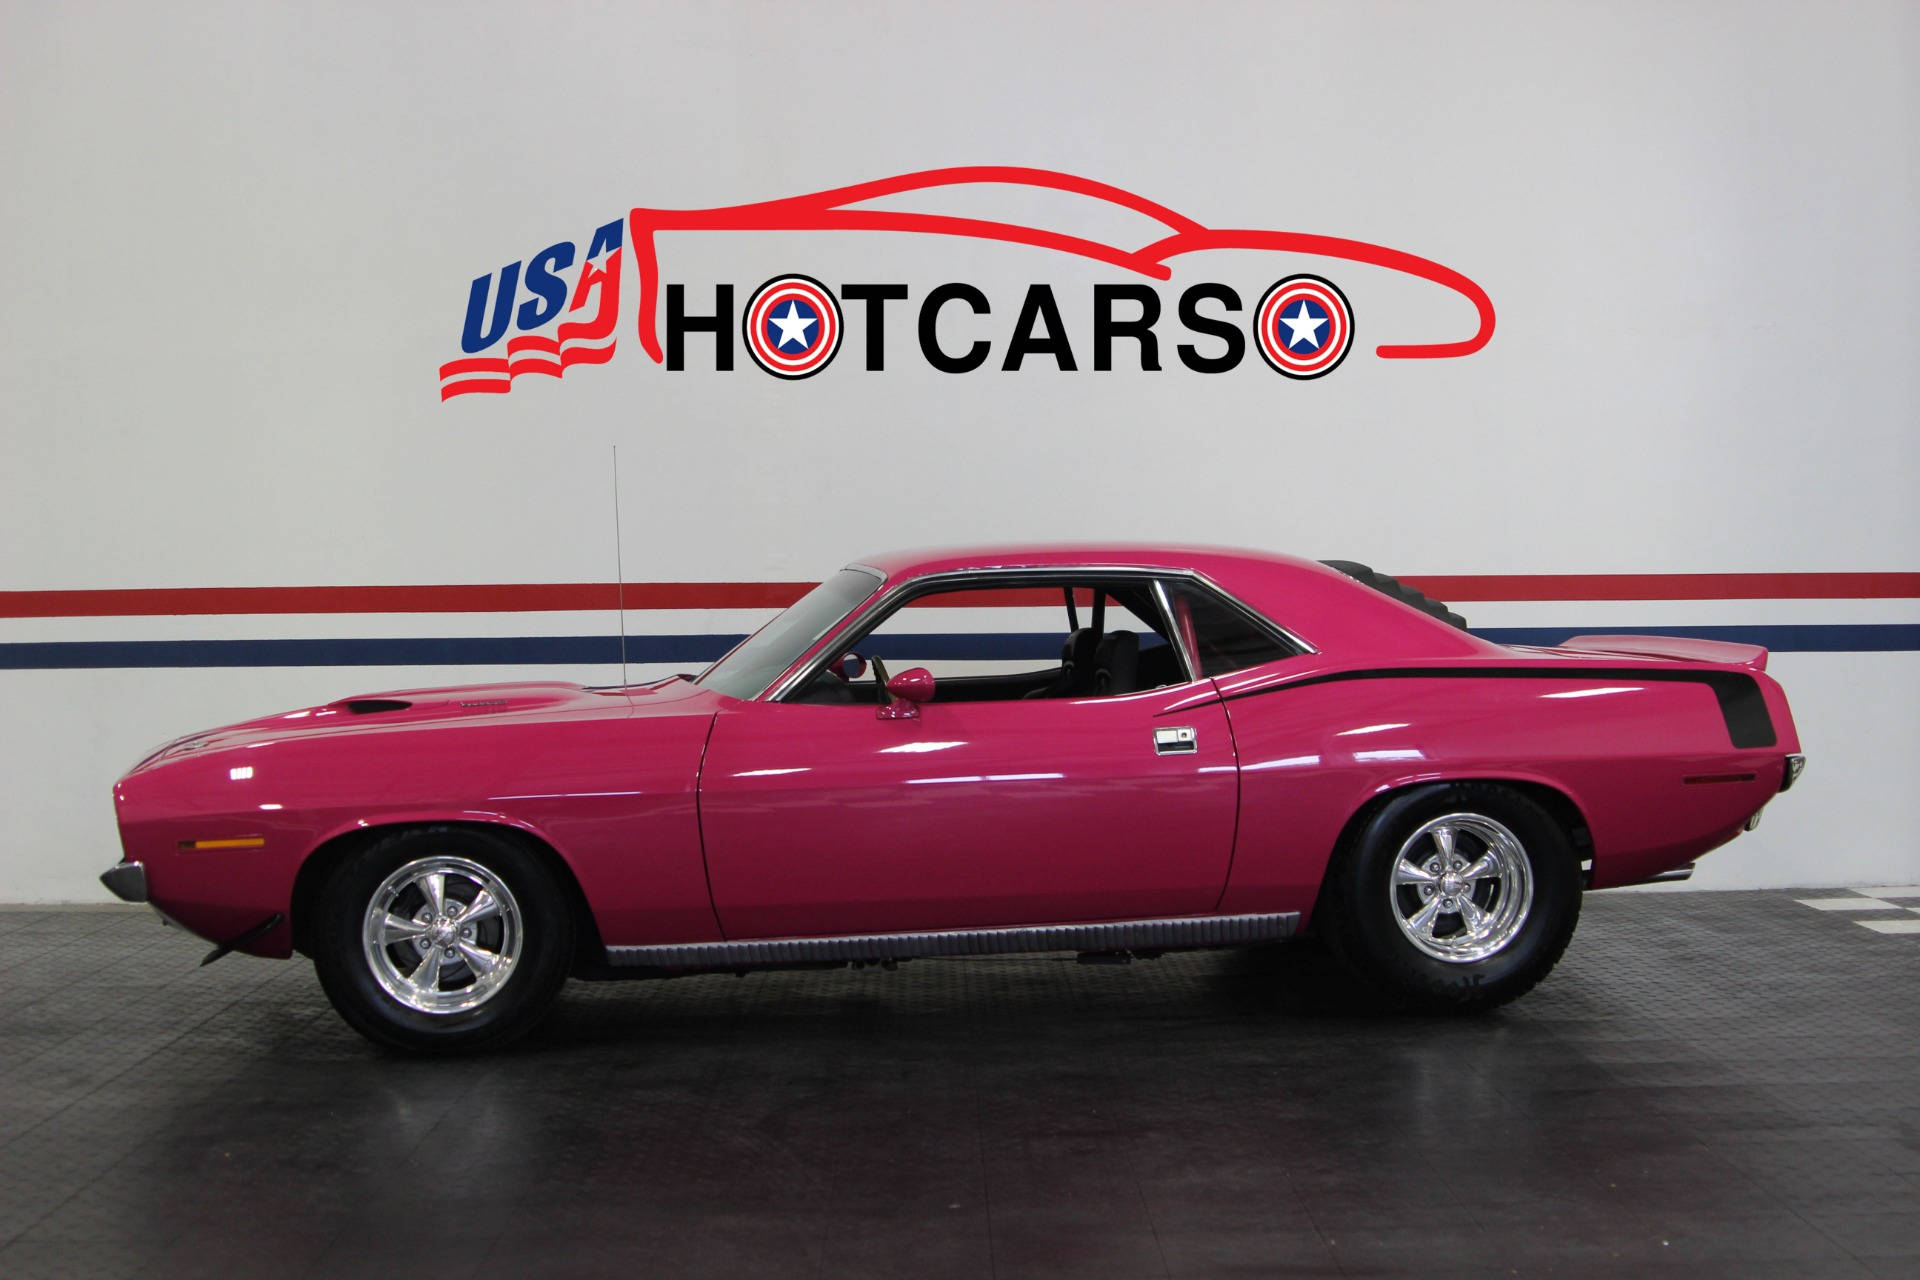 Plymouth Barracuda In Usa Hot Cars Wallpaper